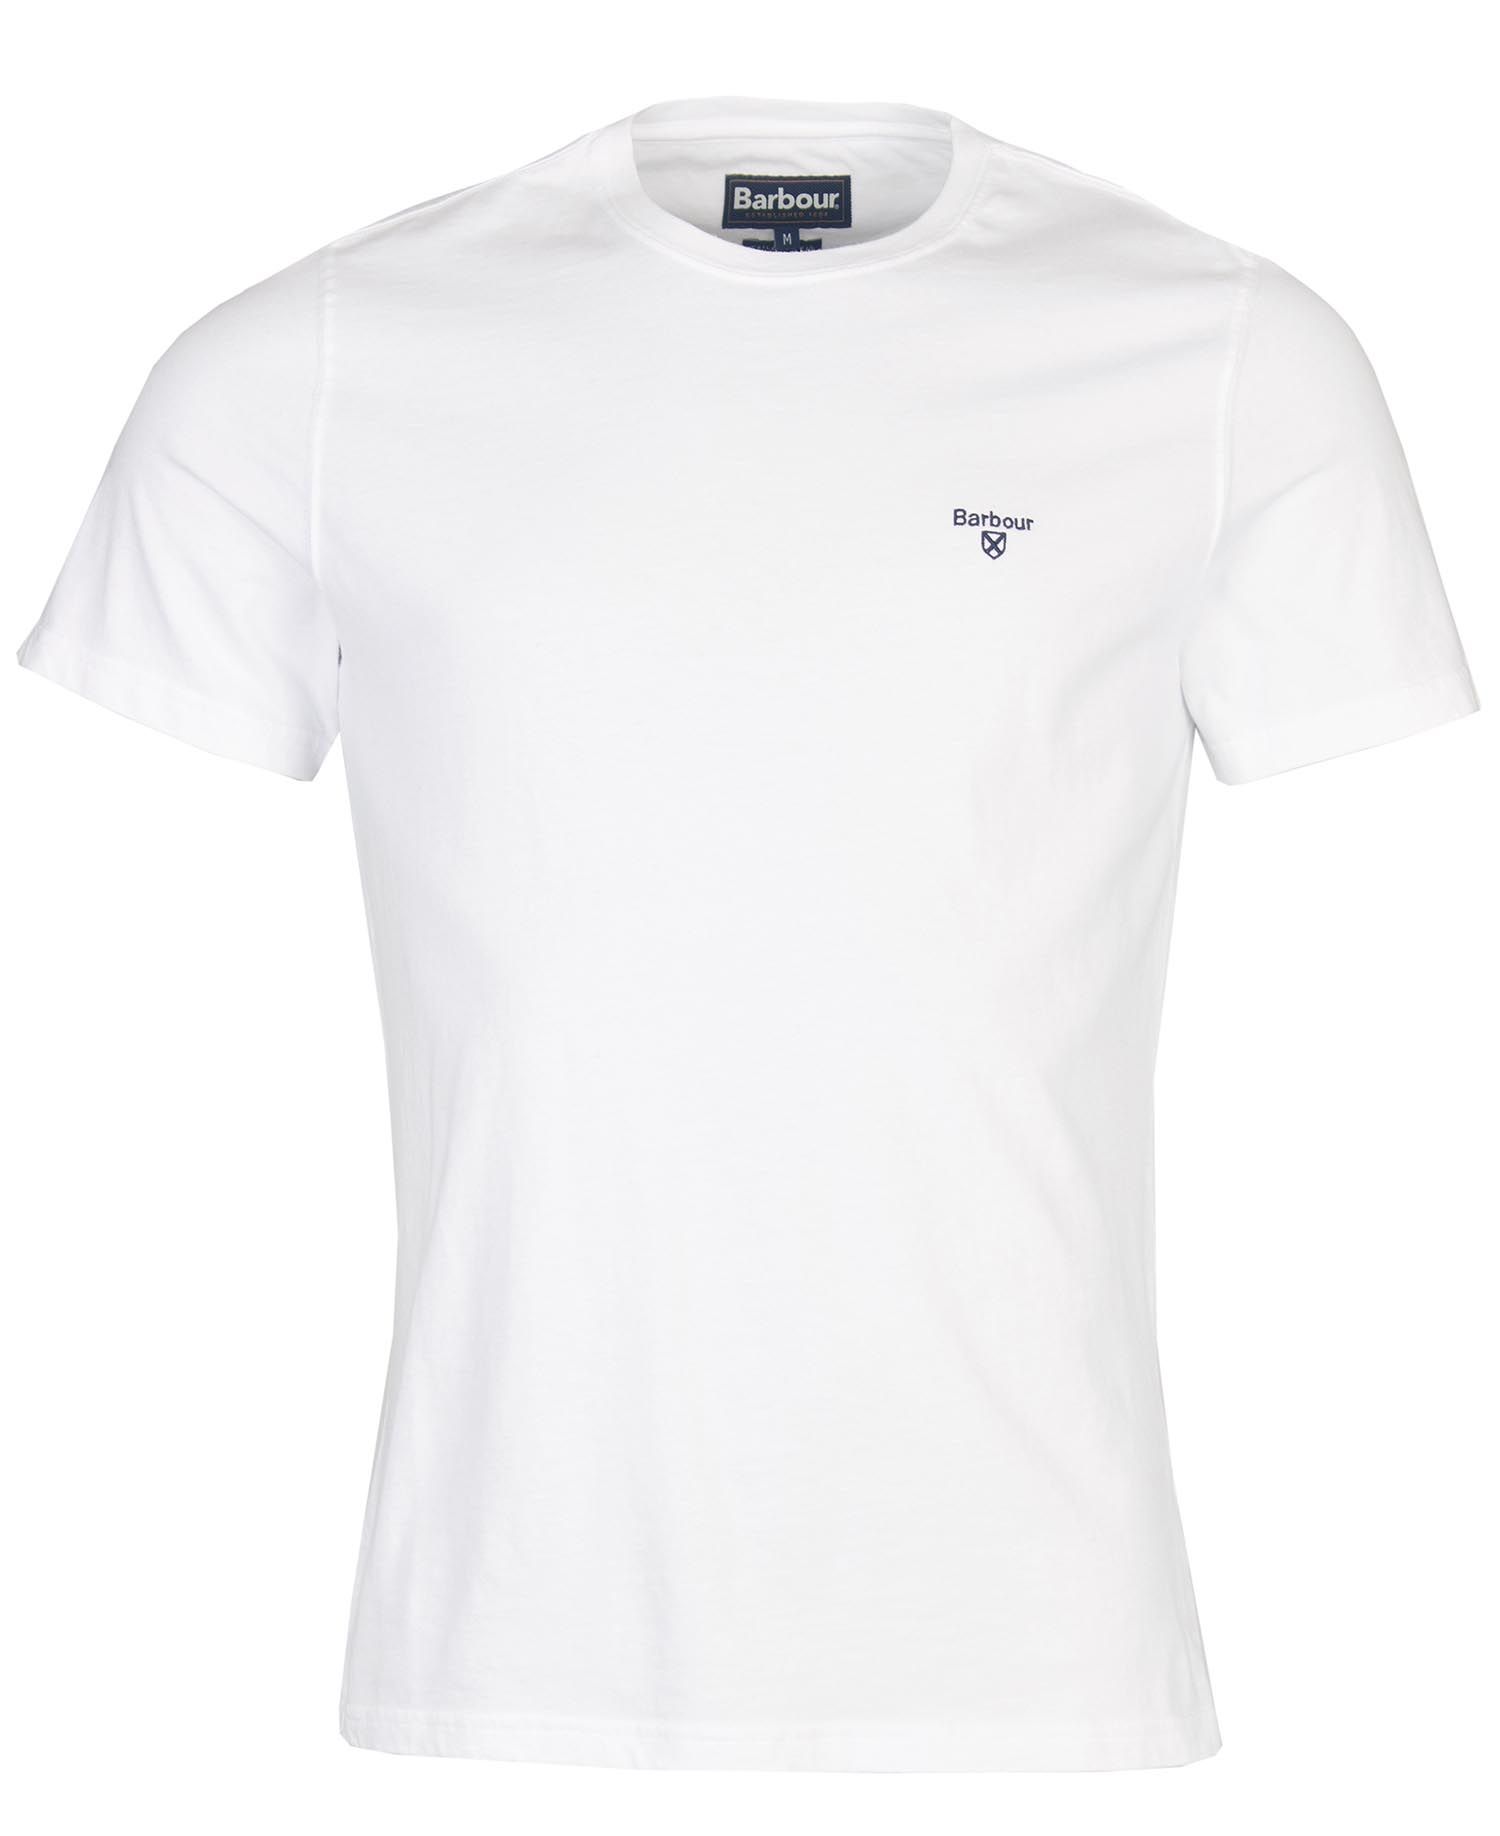 Barbour Barbour Sports T-shirt White